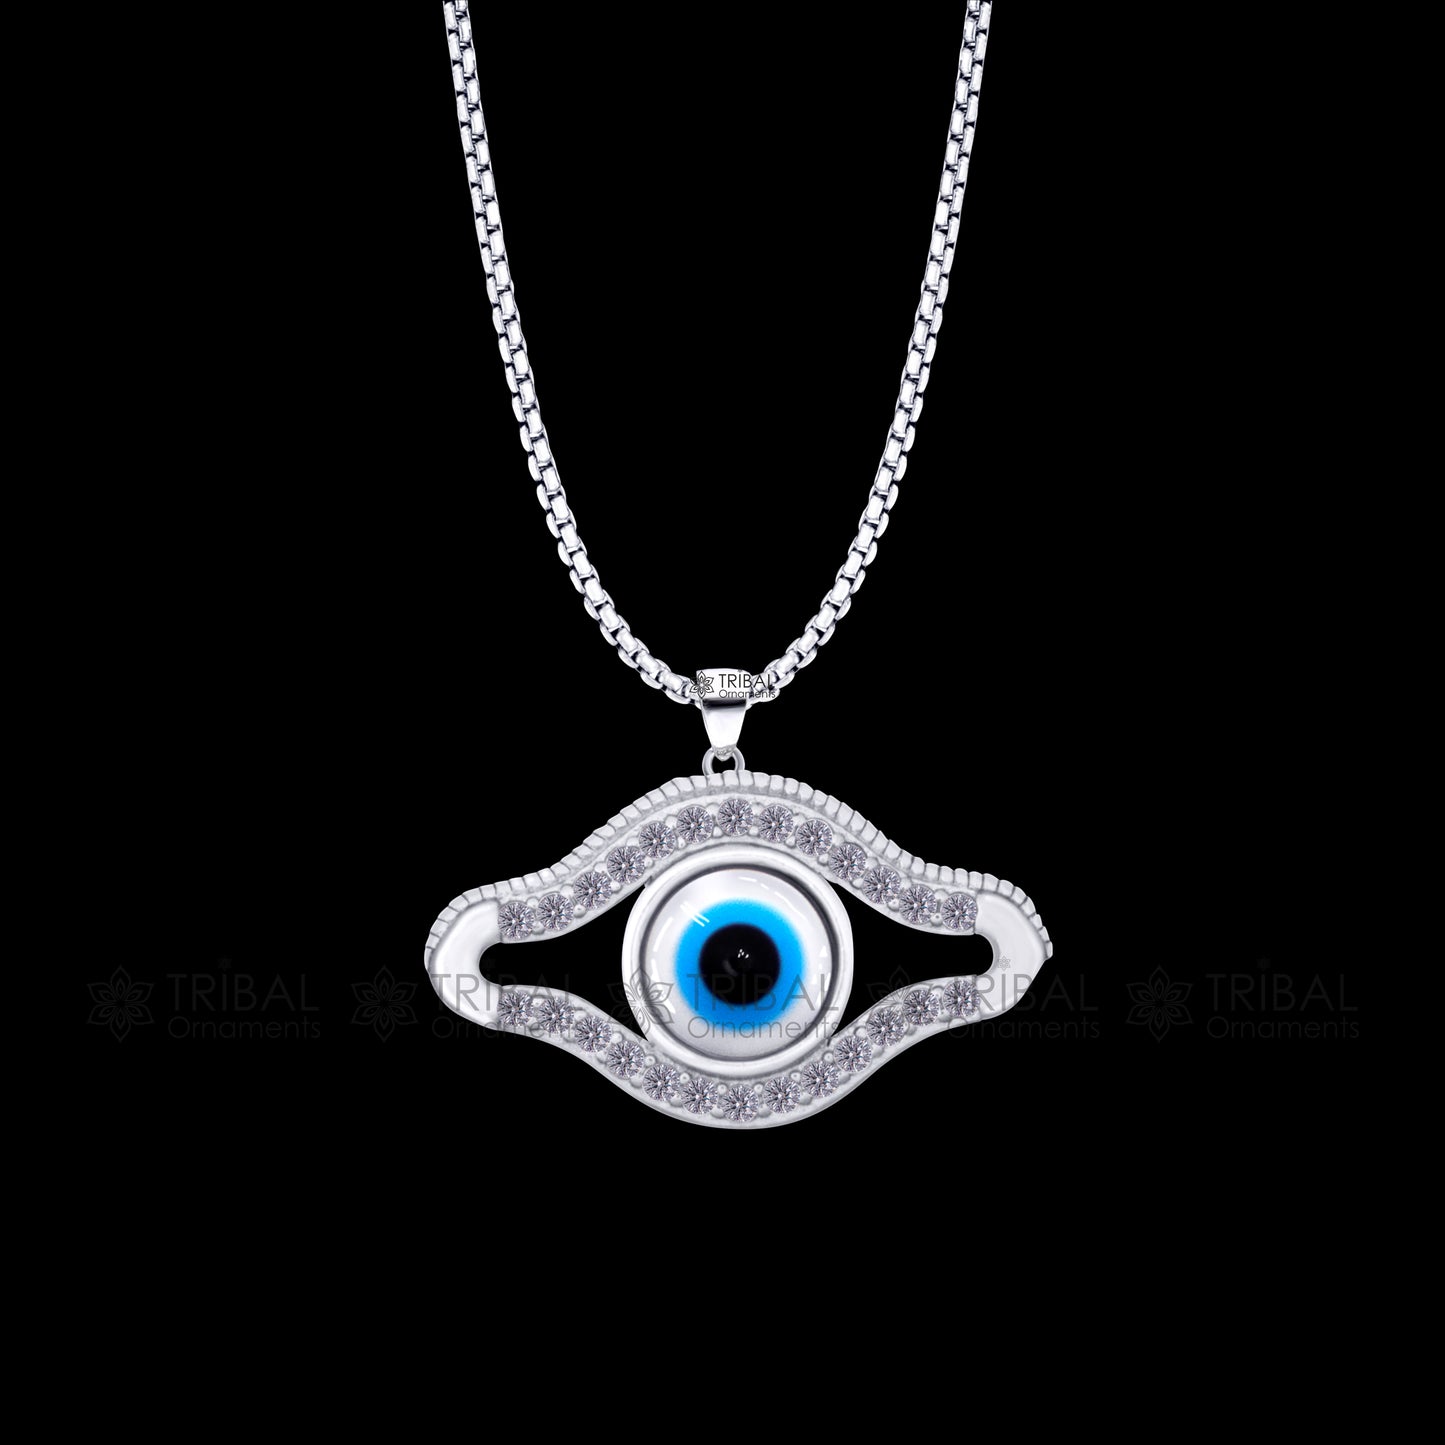 PURE 925 sterling silver evil eyes pendant with CZ stone nsp800